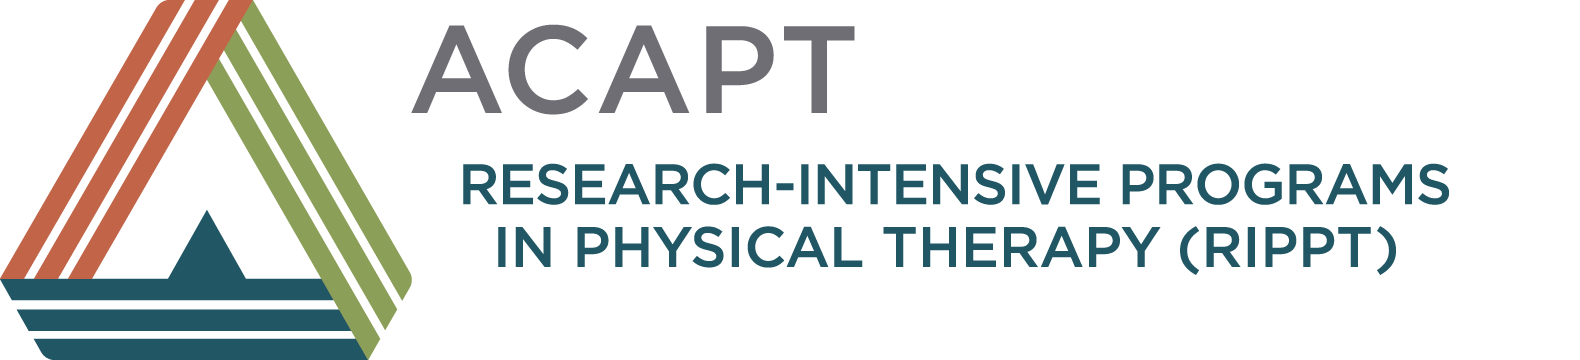 Research-Intensive Programs in Physical Therapy (RIPPT)